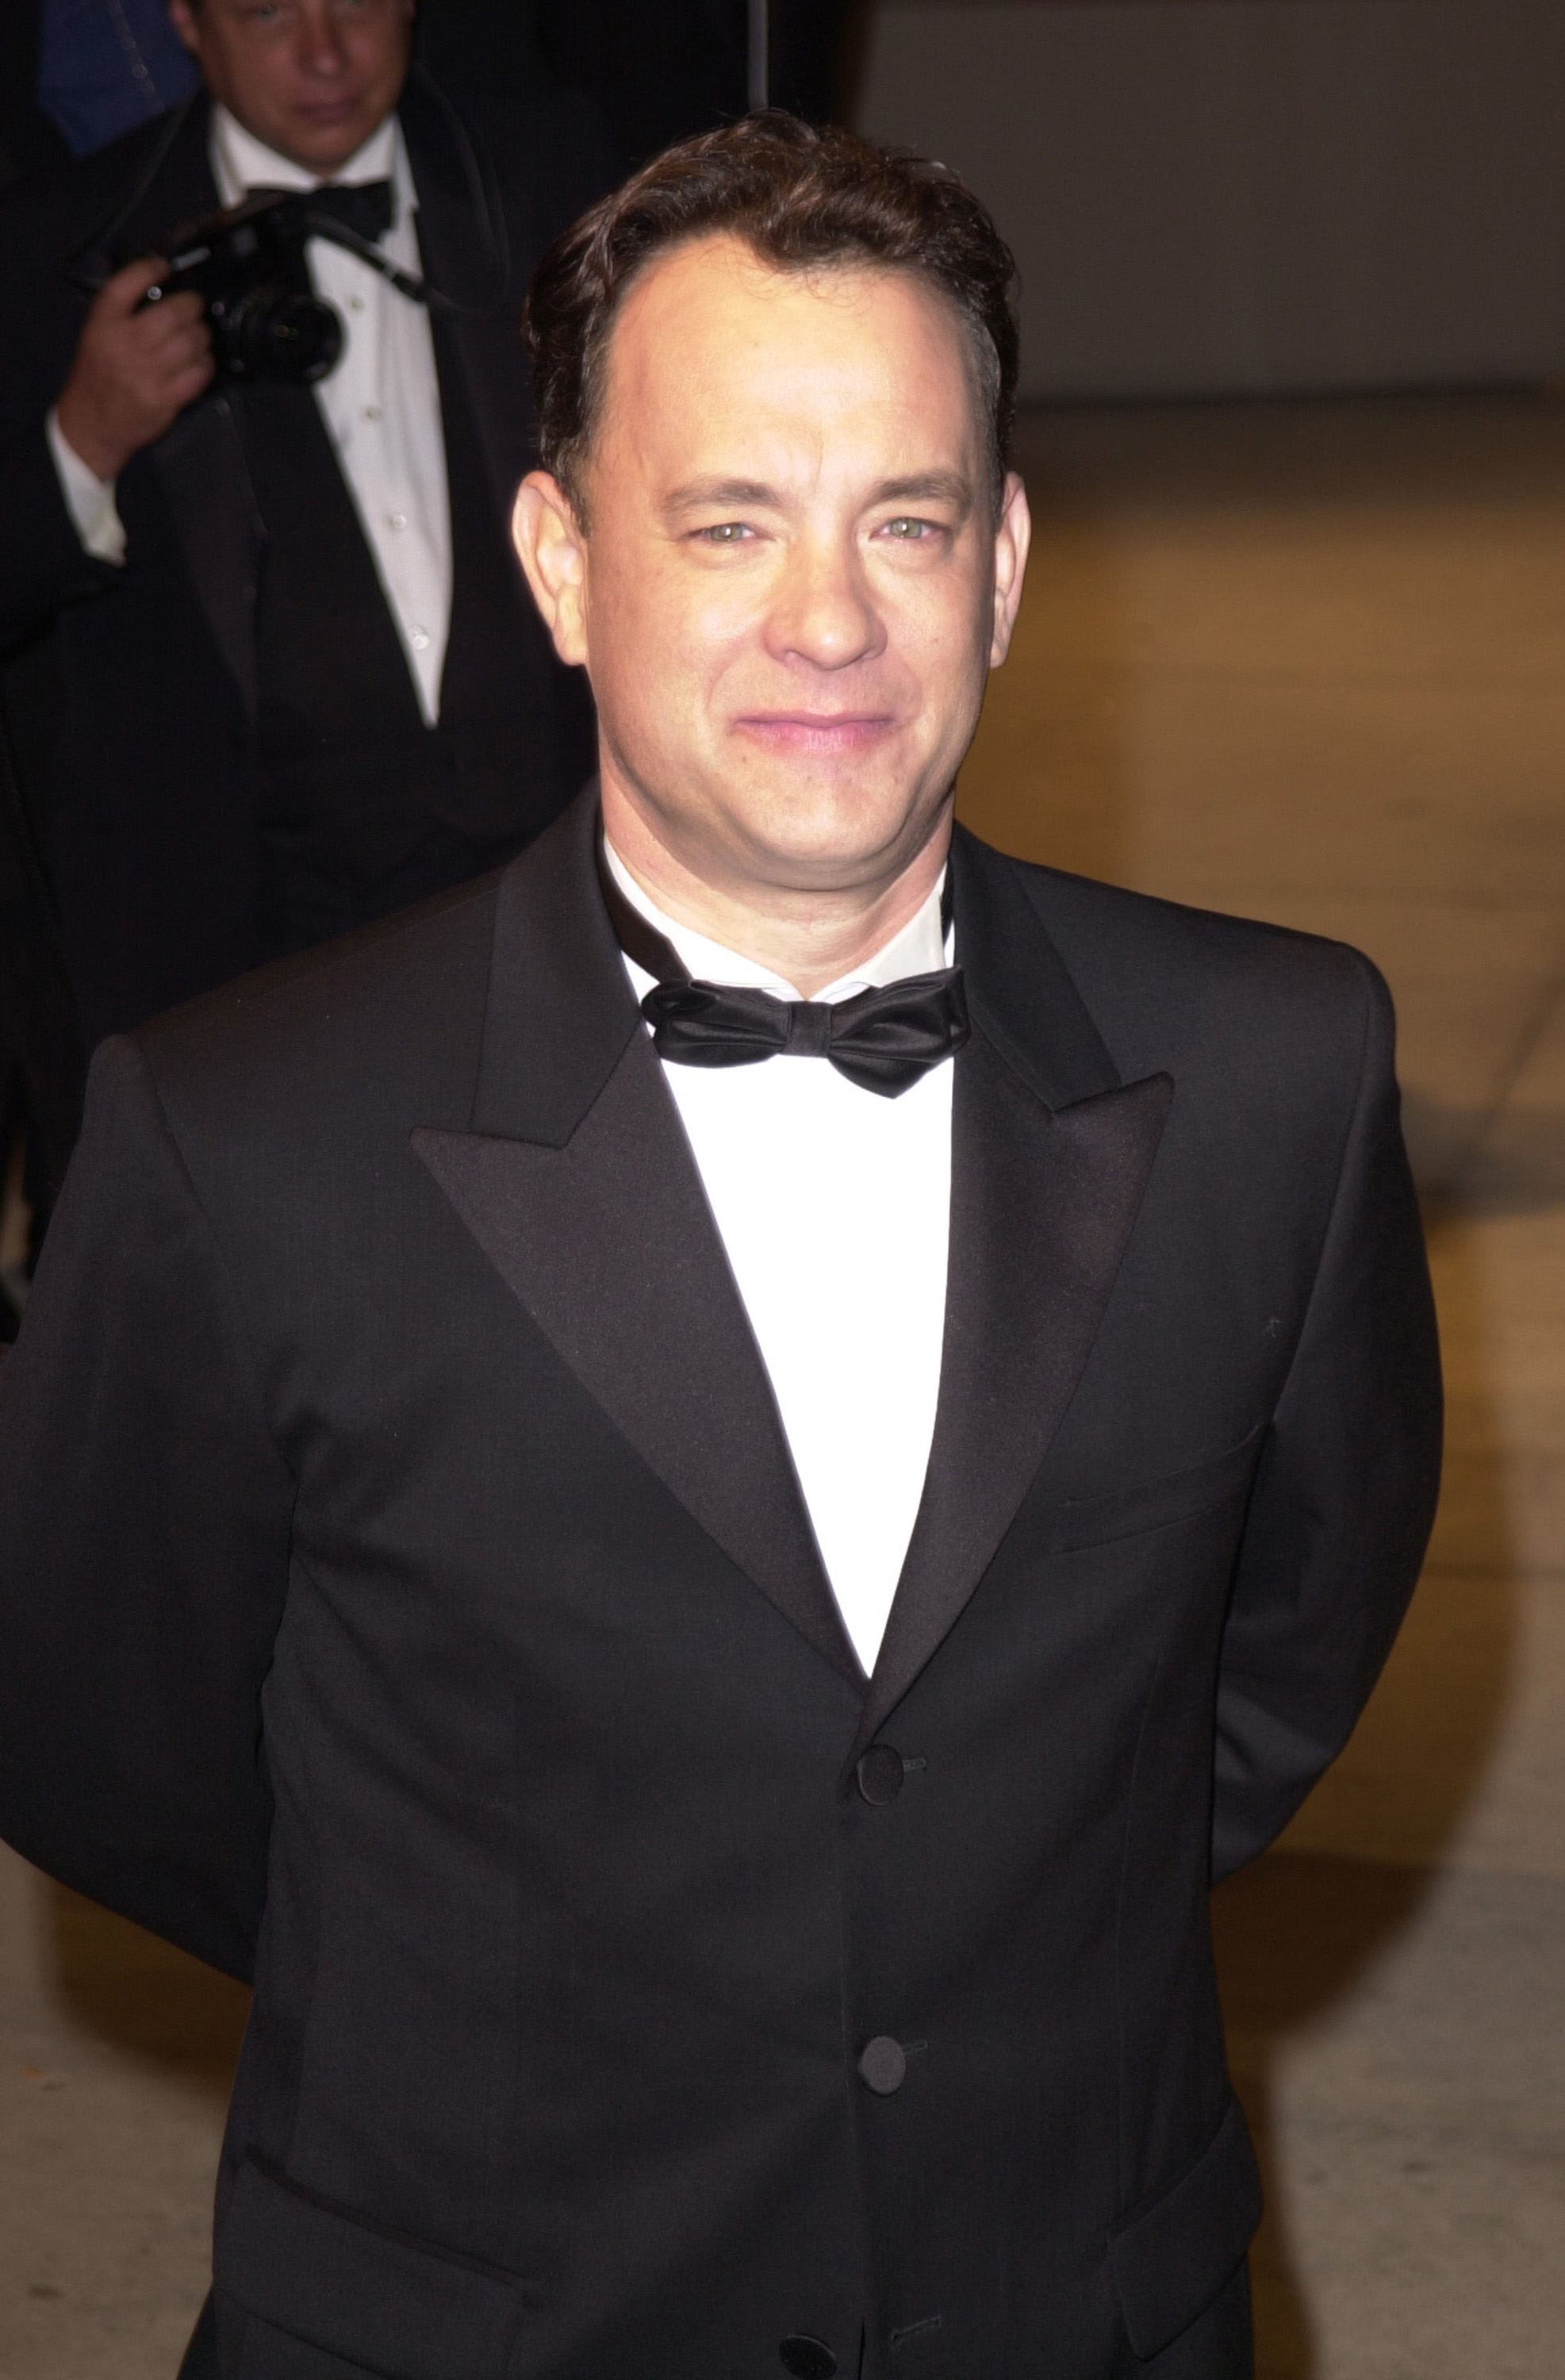 Tom Hanks in a black tuxedo with a bow tie at a formal event